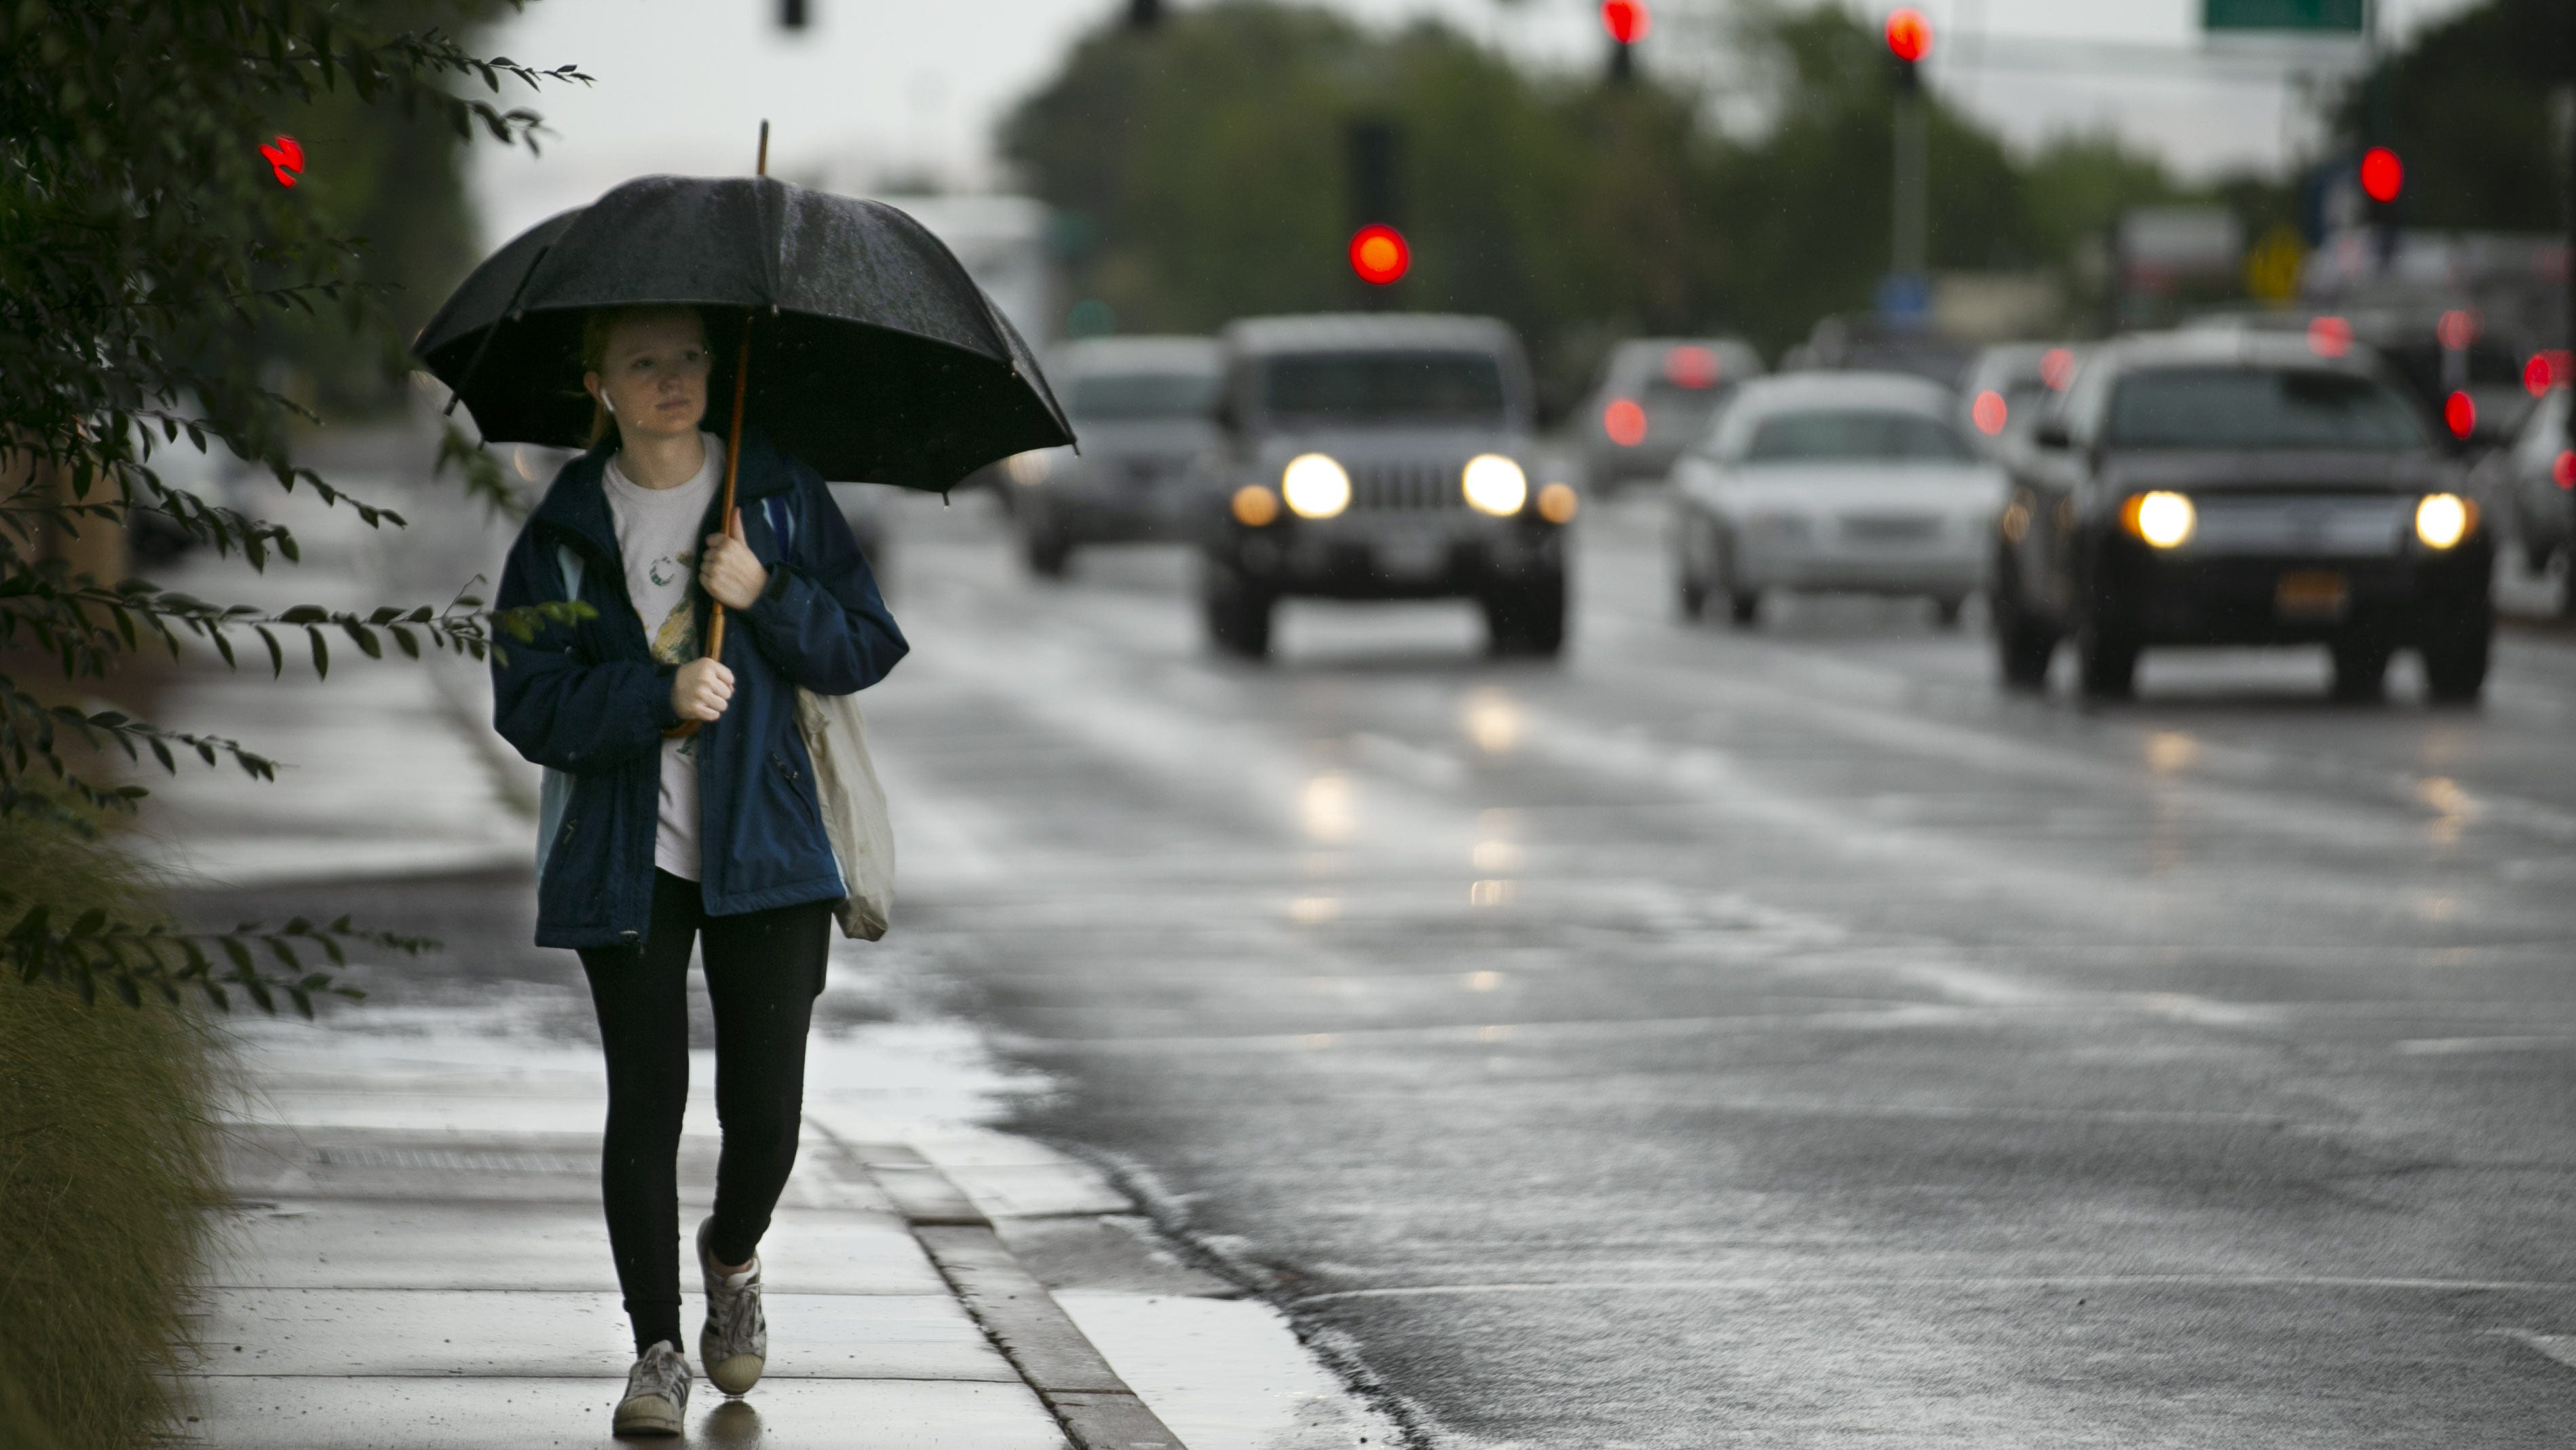 Lauren Matz, 15, attempts to stay dry under an umbrella while walking home from the store in Phoenix on July 16, 2021.